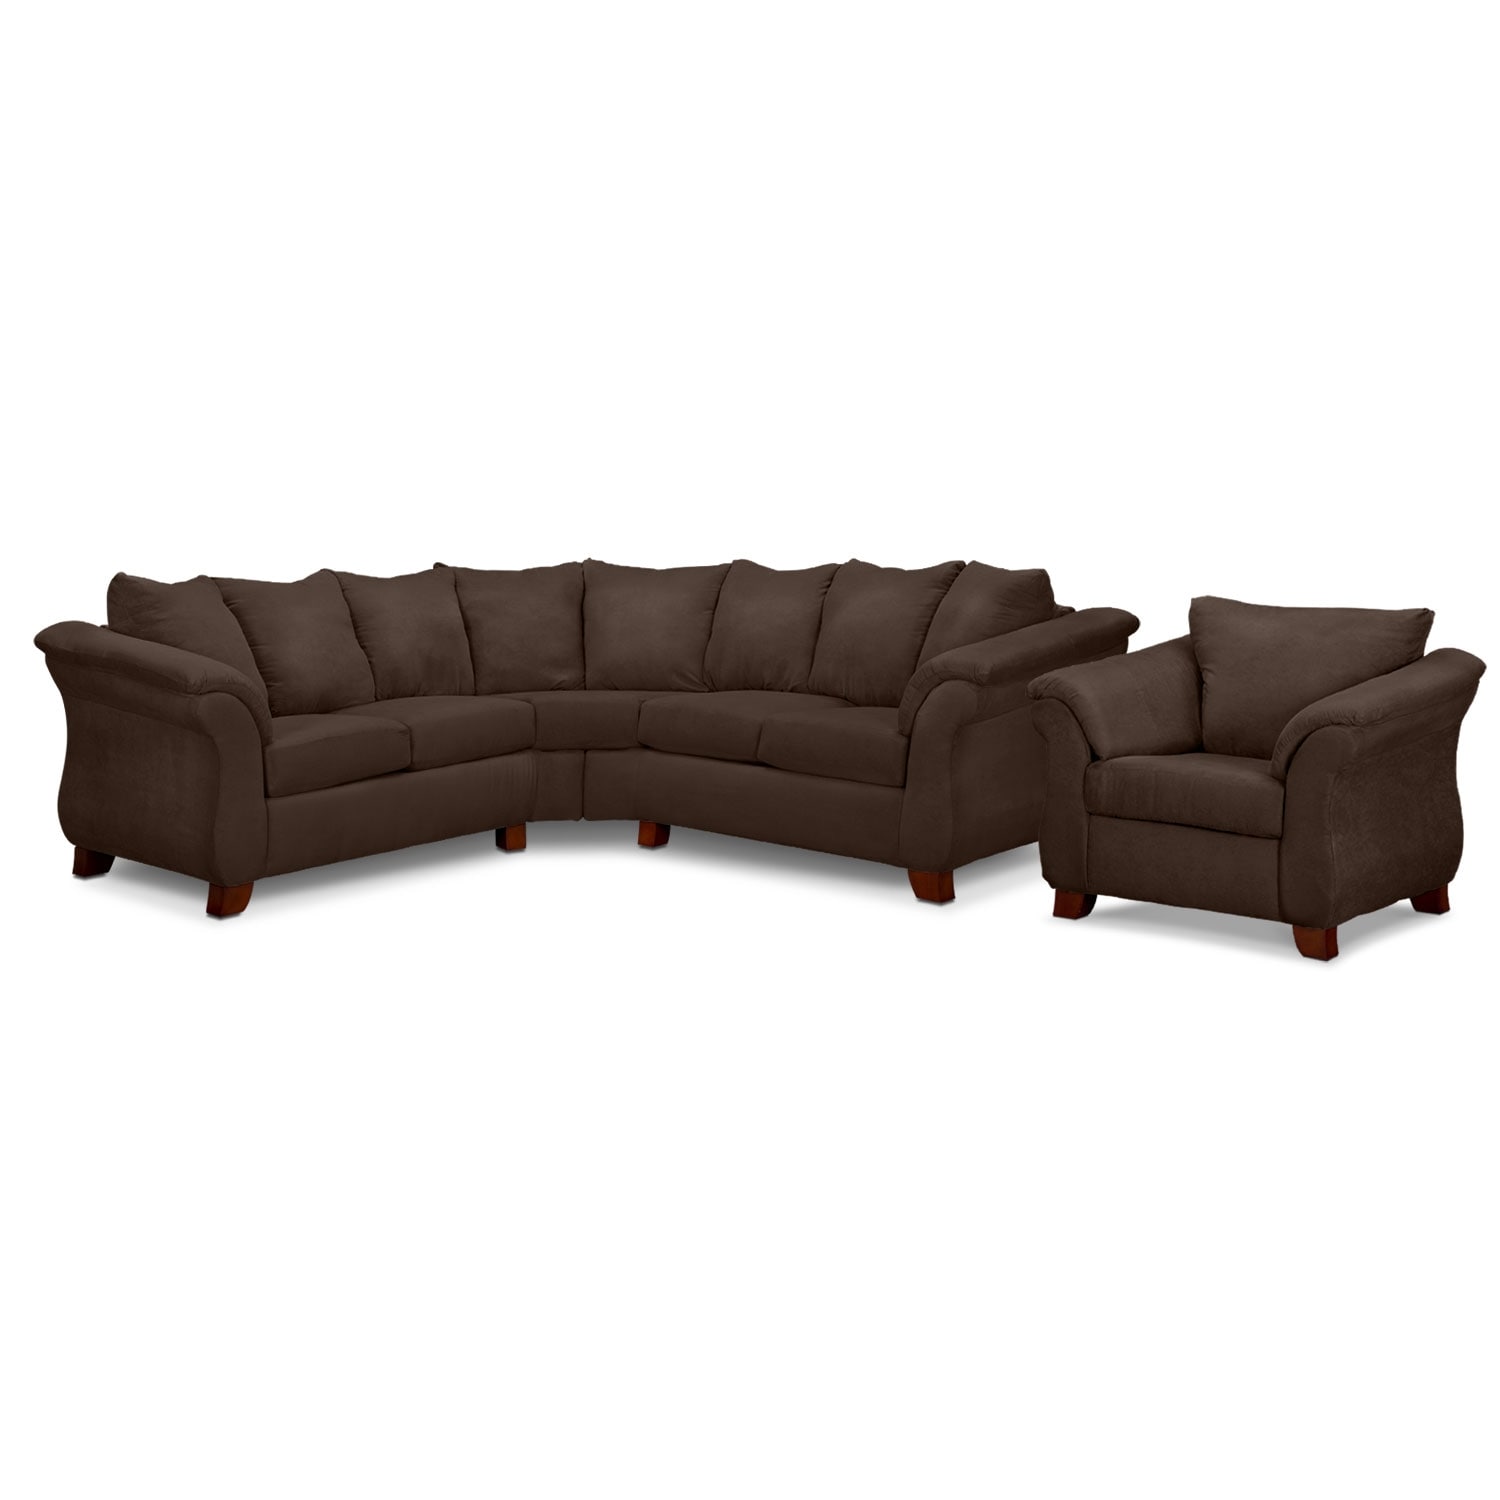 Adrian 2-Piece Sectional and Chair Set - Chocolate | American Signature Furniture